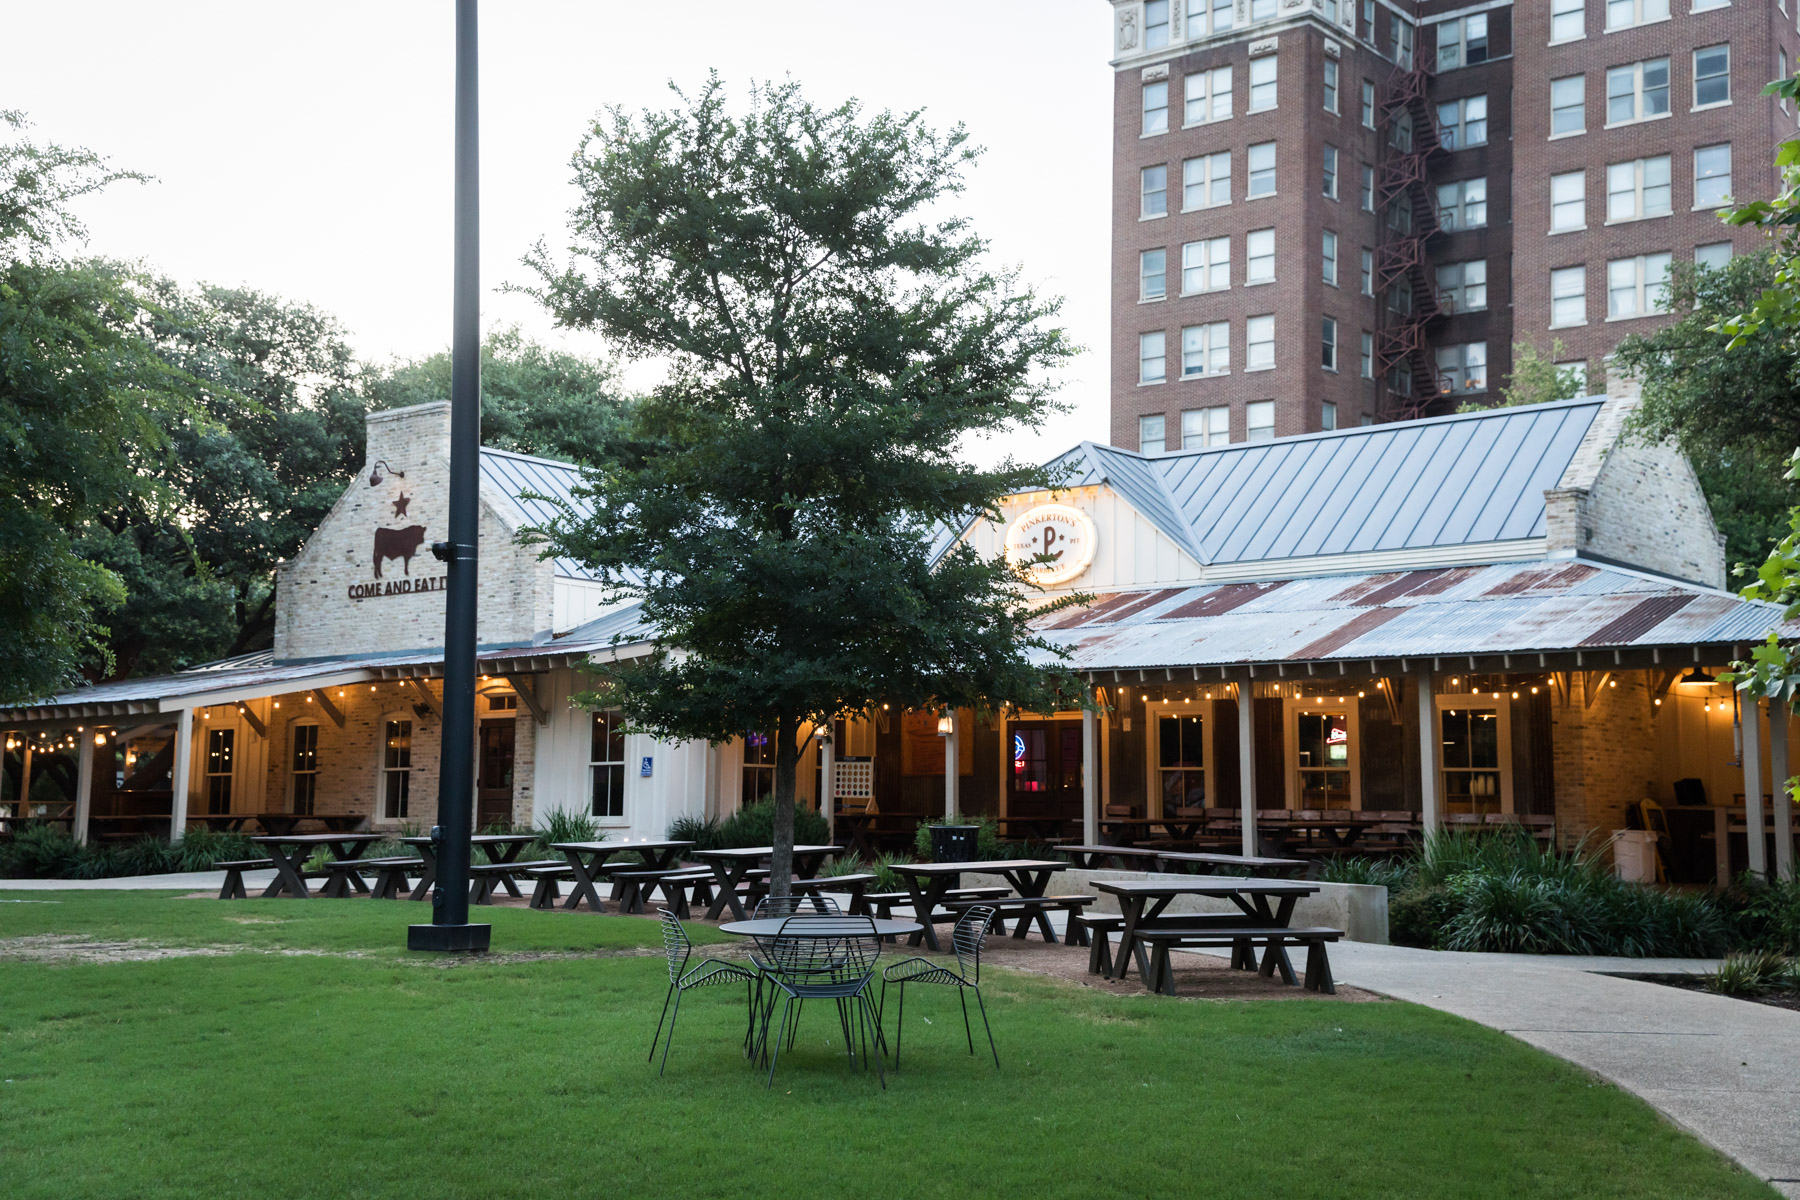 Pinkerton's Barbecue in Legacy Park for an article on the perfect downtown San Antonio family portrait itinerary